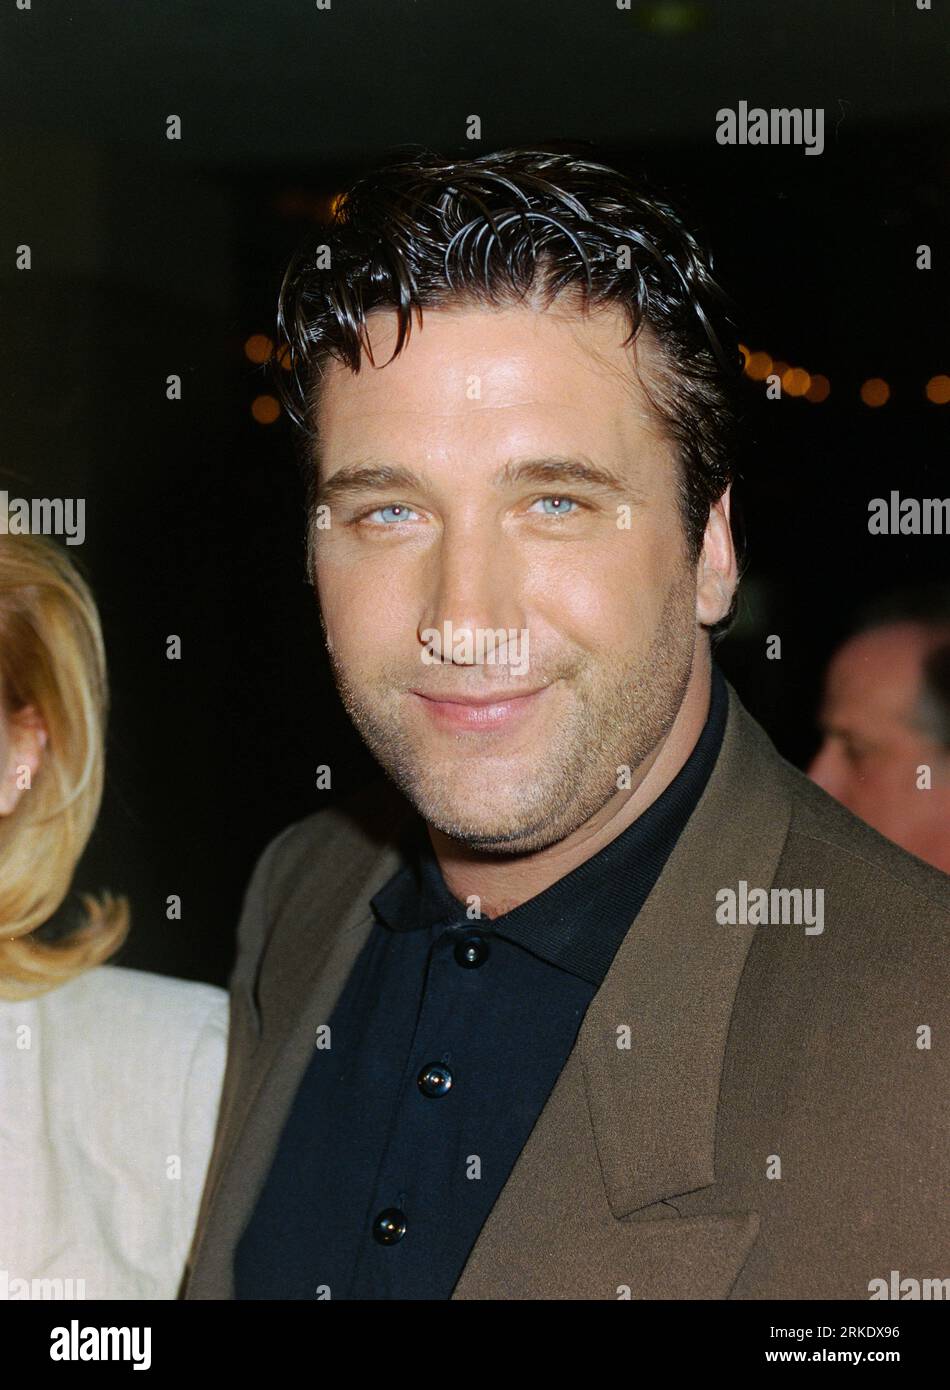 LOS ANGELES, CA. January 29, 1996: Actor Daniel Baldwin at the premiere of ÒThe JurorÓ at the Cineplex Odeon Cinema, Century City Picture: Paul Smith / Featureflash Stock Photo